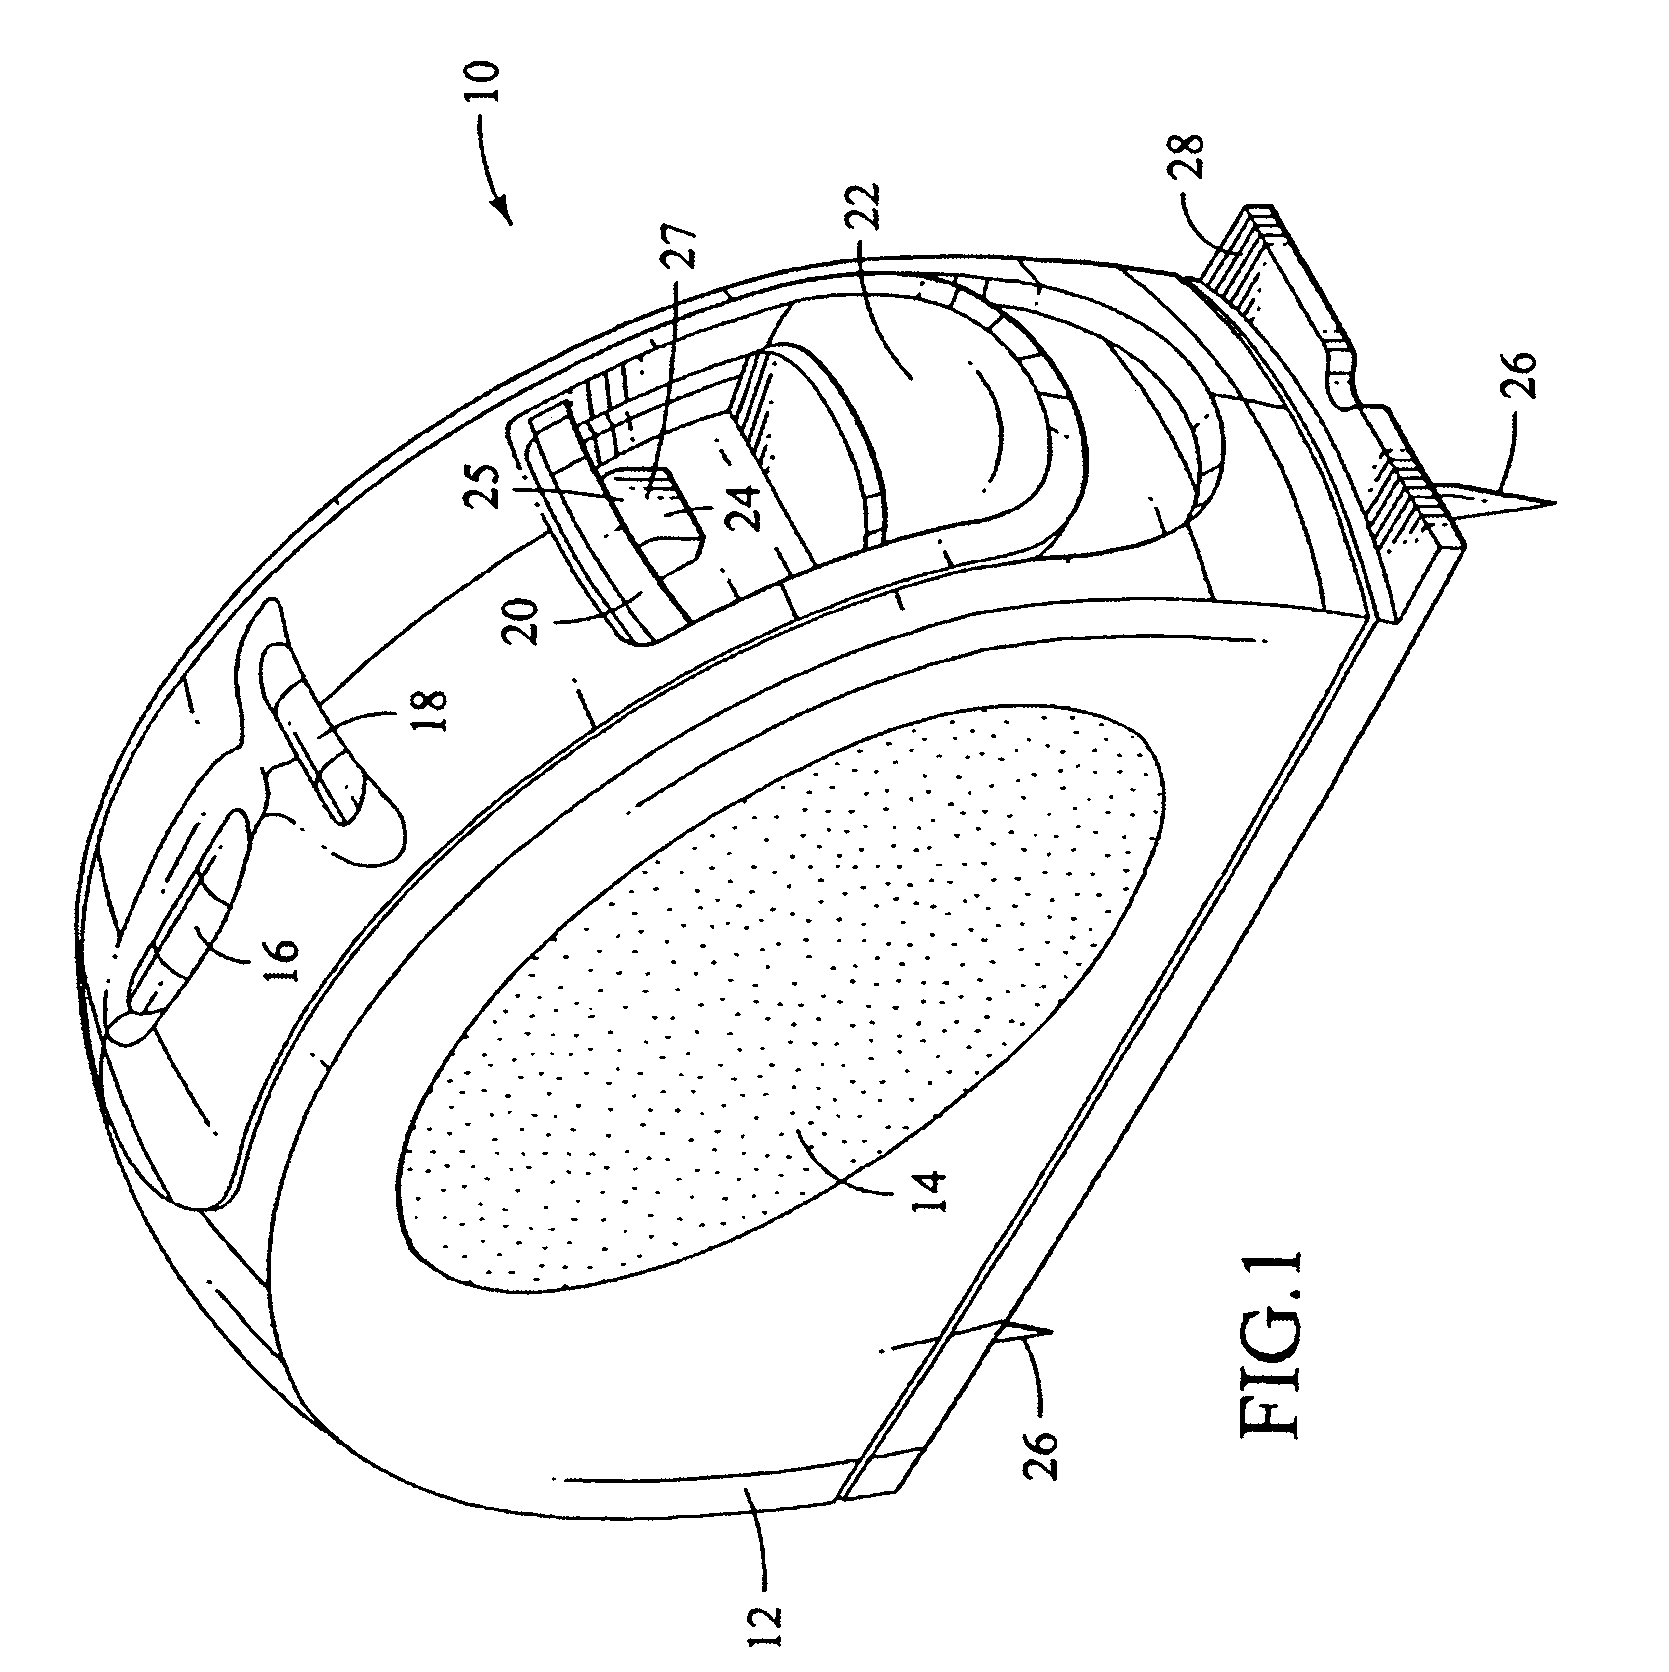 Laser line generating device with swivel base